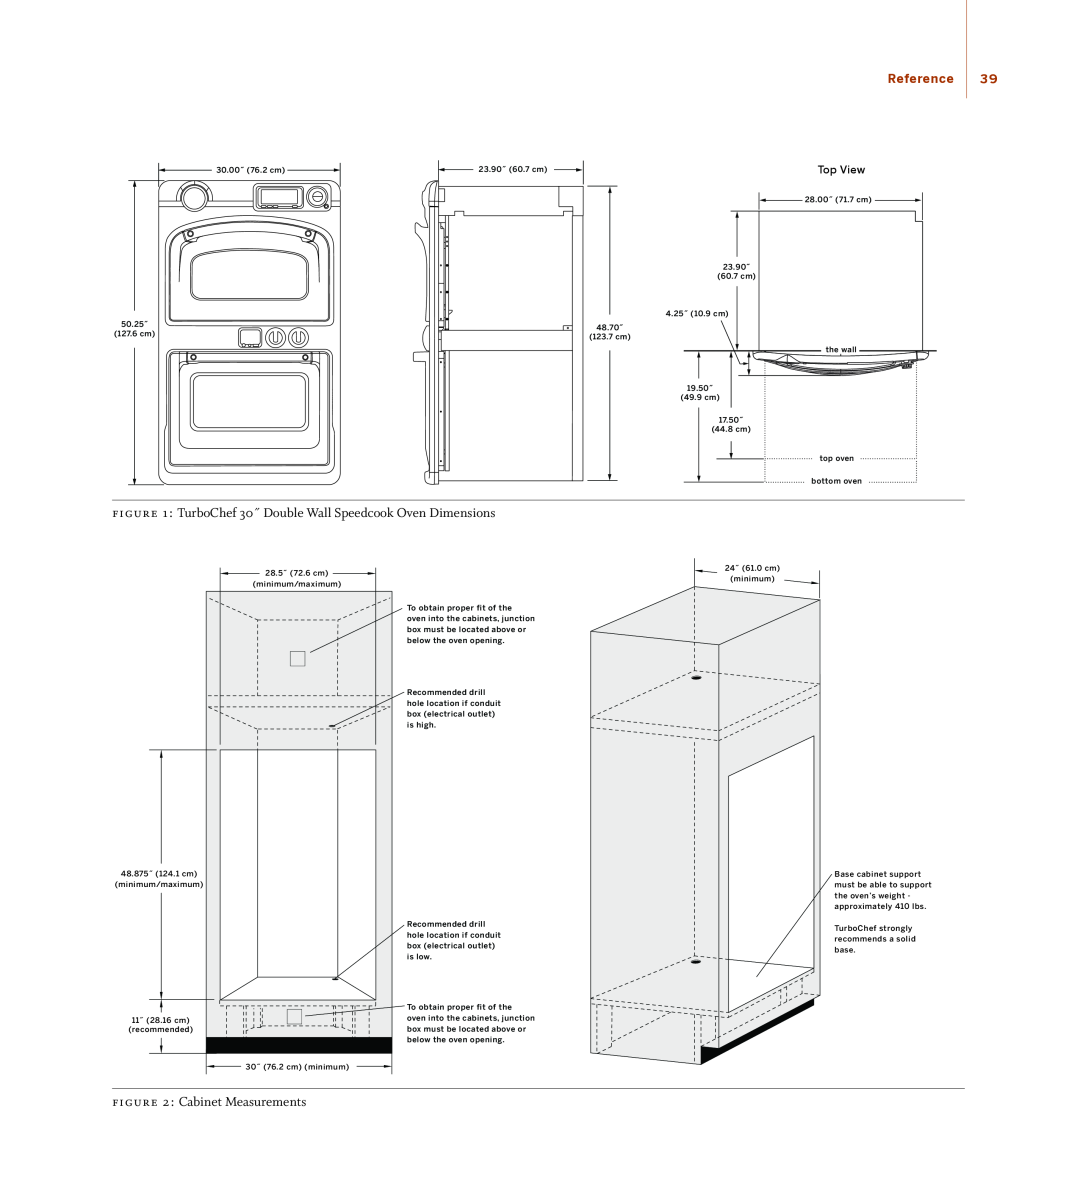 Turbo Chef Technologies TD030*240 TurboChef 30˝ Double Wall Speedcook Oven Dimensions, Cabinet Measurements, Reference 